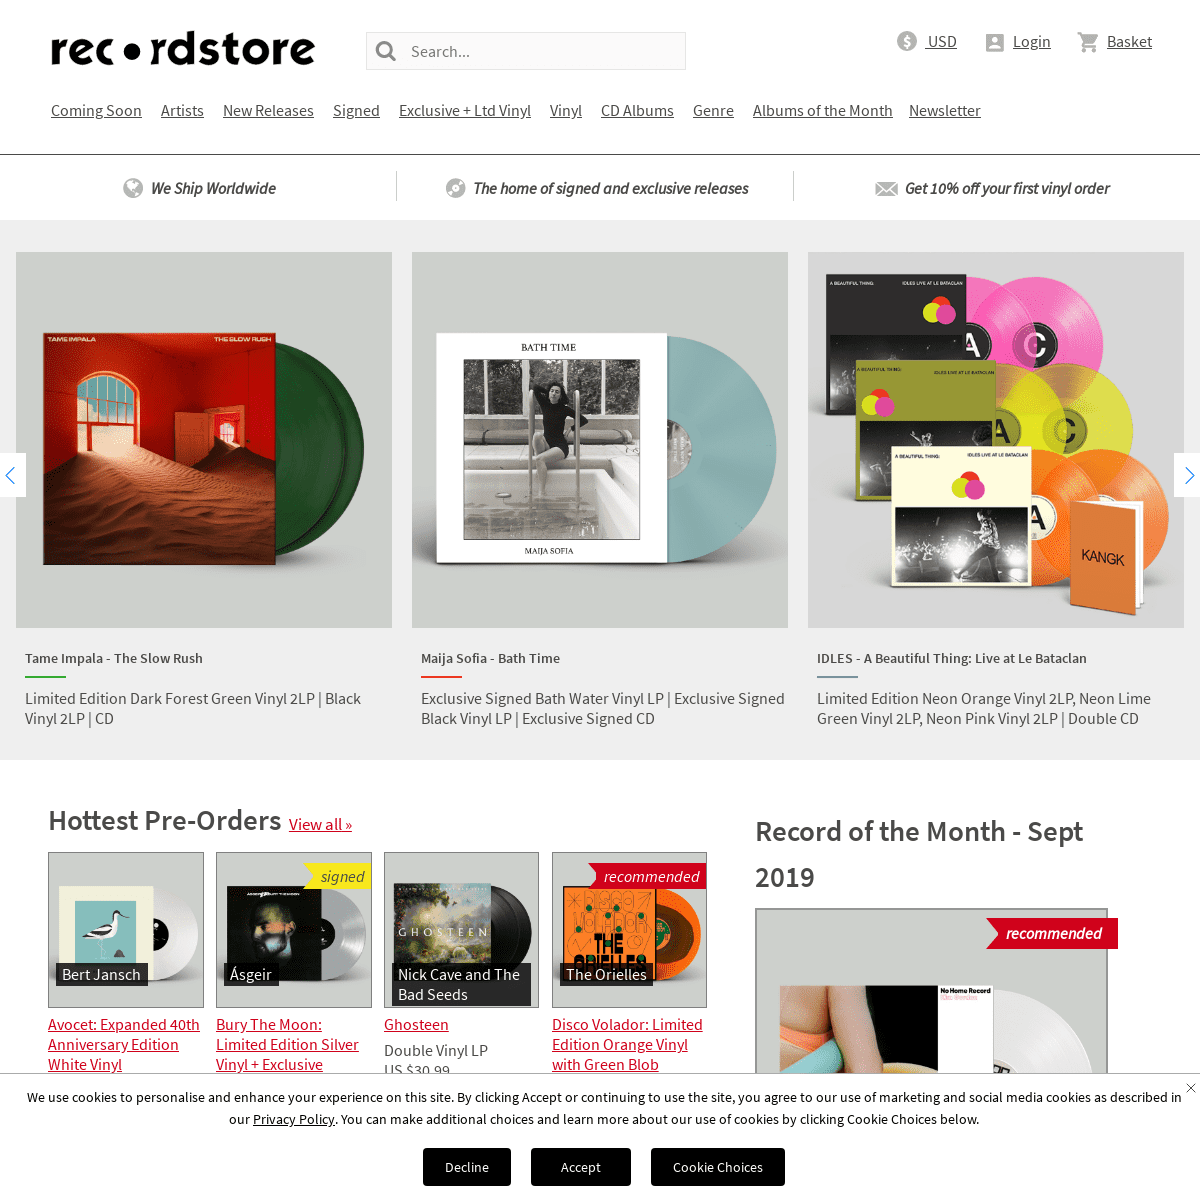 A complete backup of recordstore.co.uk